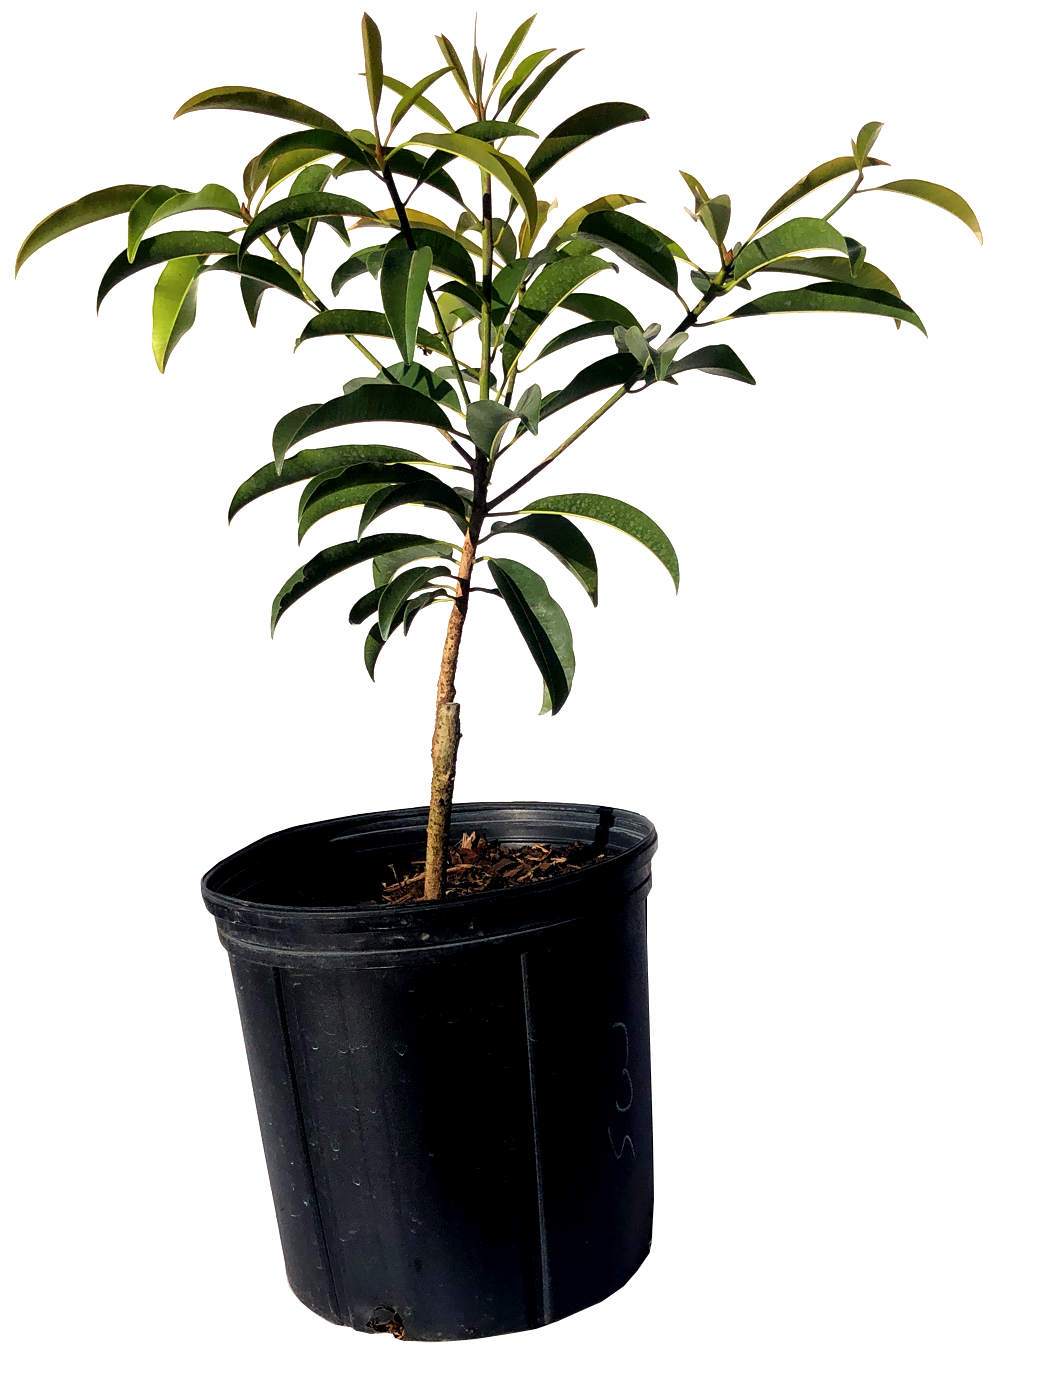 Sapodilla Nispero Dwarf Tree Grafted, Silas Woods Variety, 2 Feet Tall, 3-gal Container from Florida